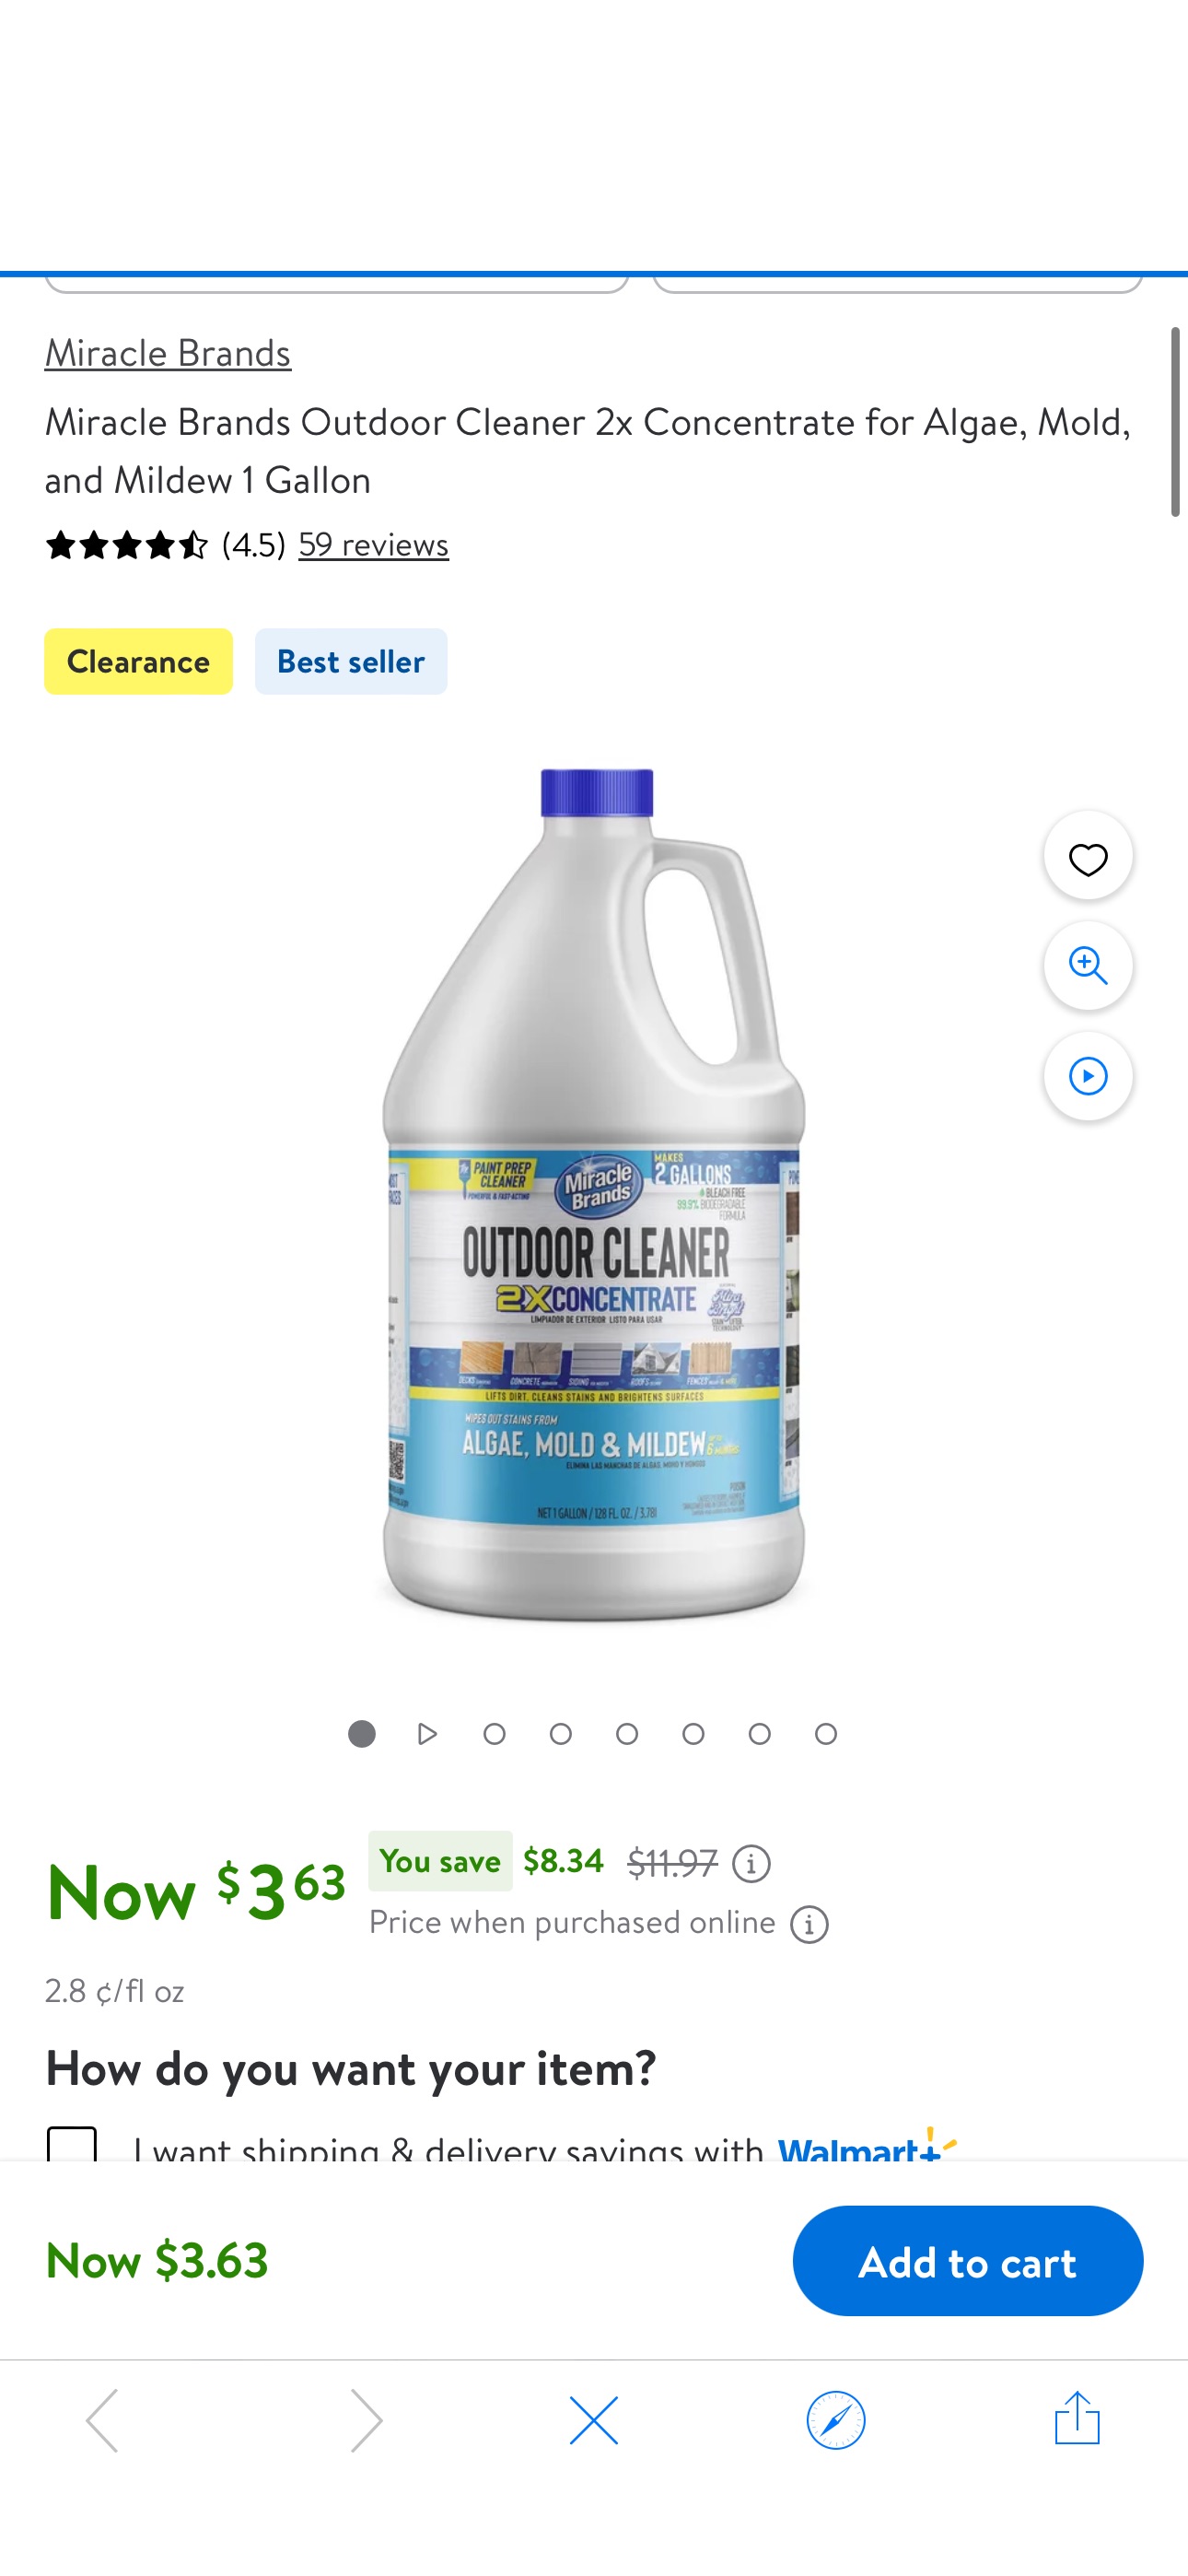 Miracle Brands Outdoor Cleaner 2x Concentrate for Algae, Mold, and Mildew 1 Gallon - Walmart.com